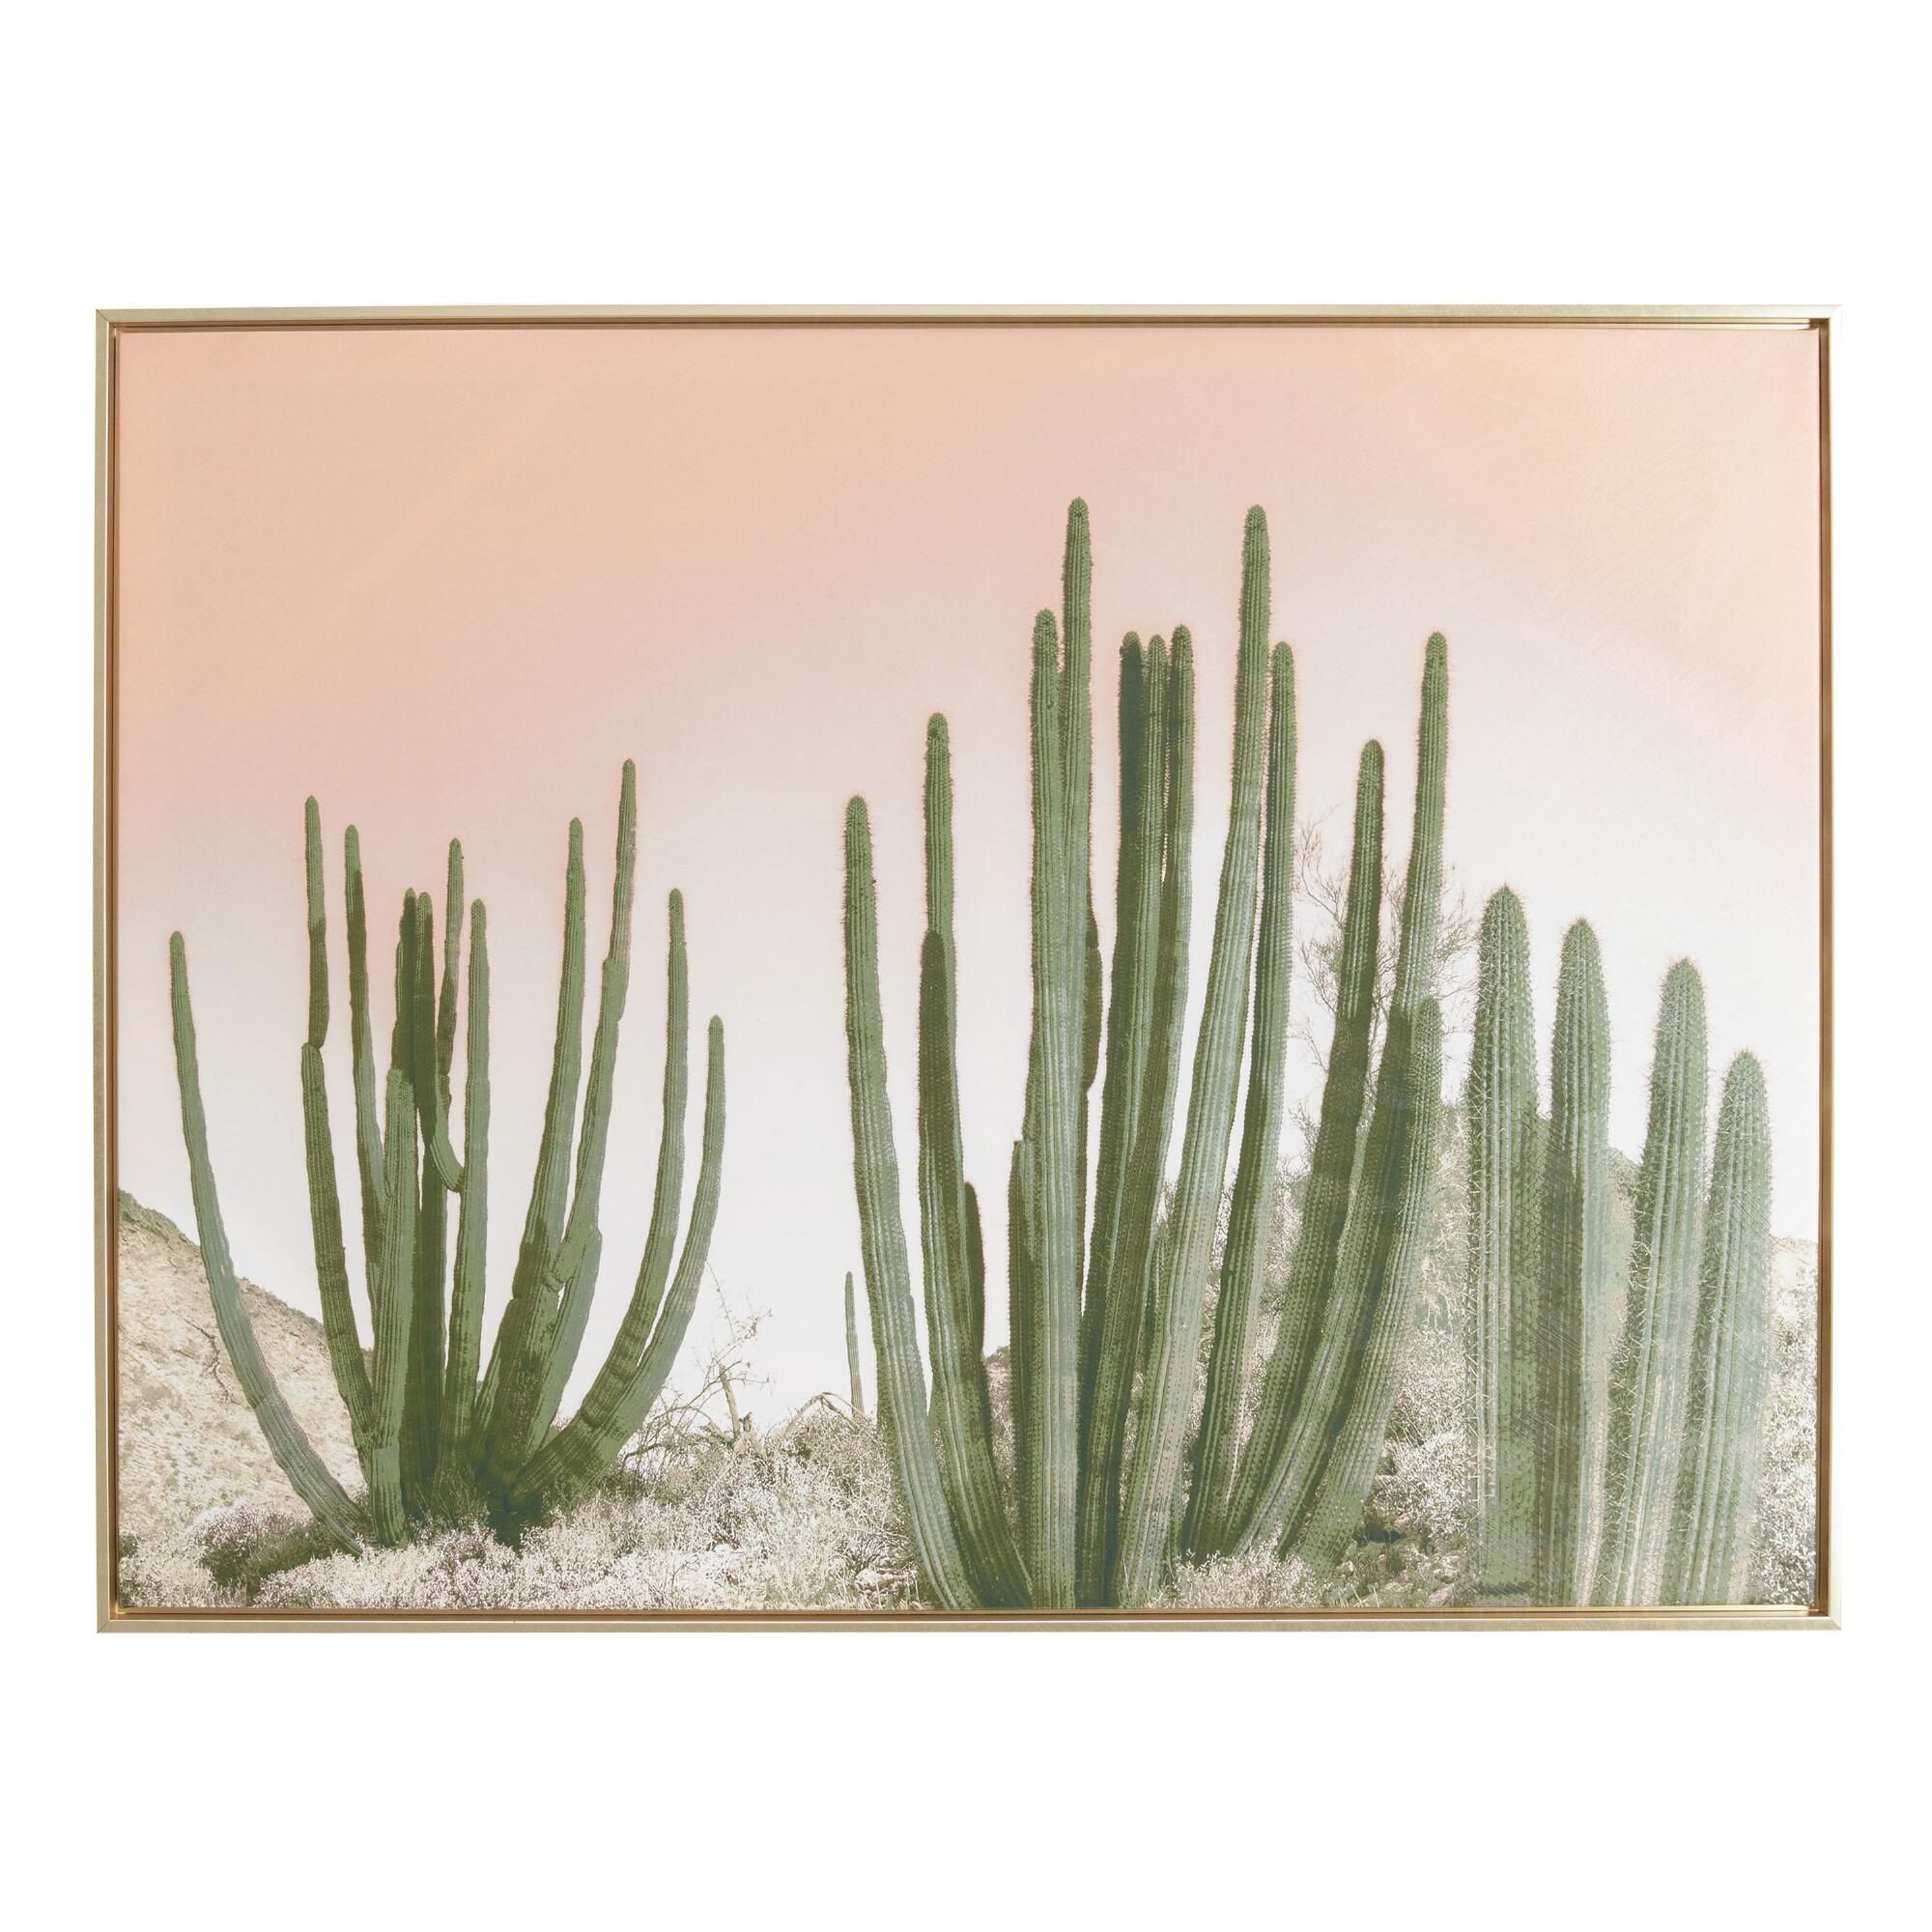 Organ Pipe Cactus Framed Canvas Wall Art: Pink/Gold - Large by World Market | World Market